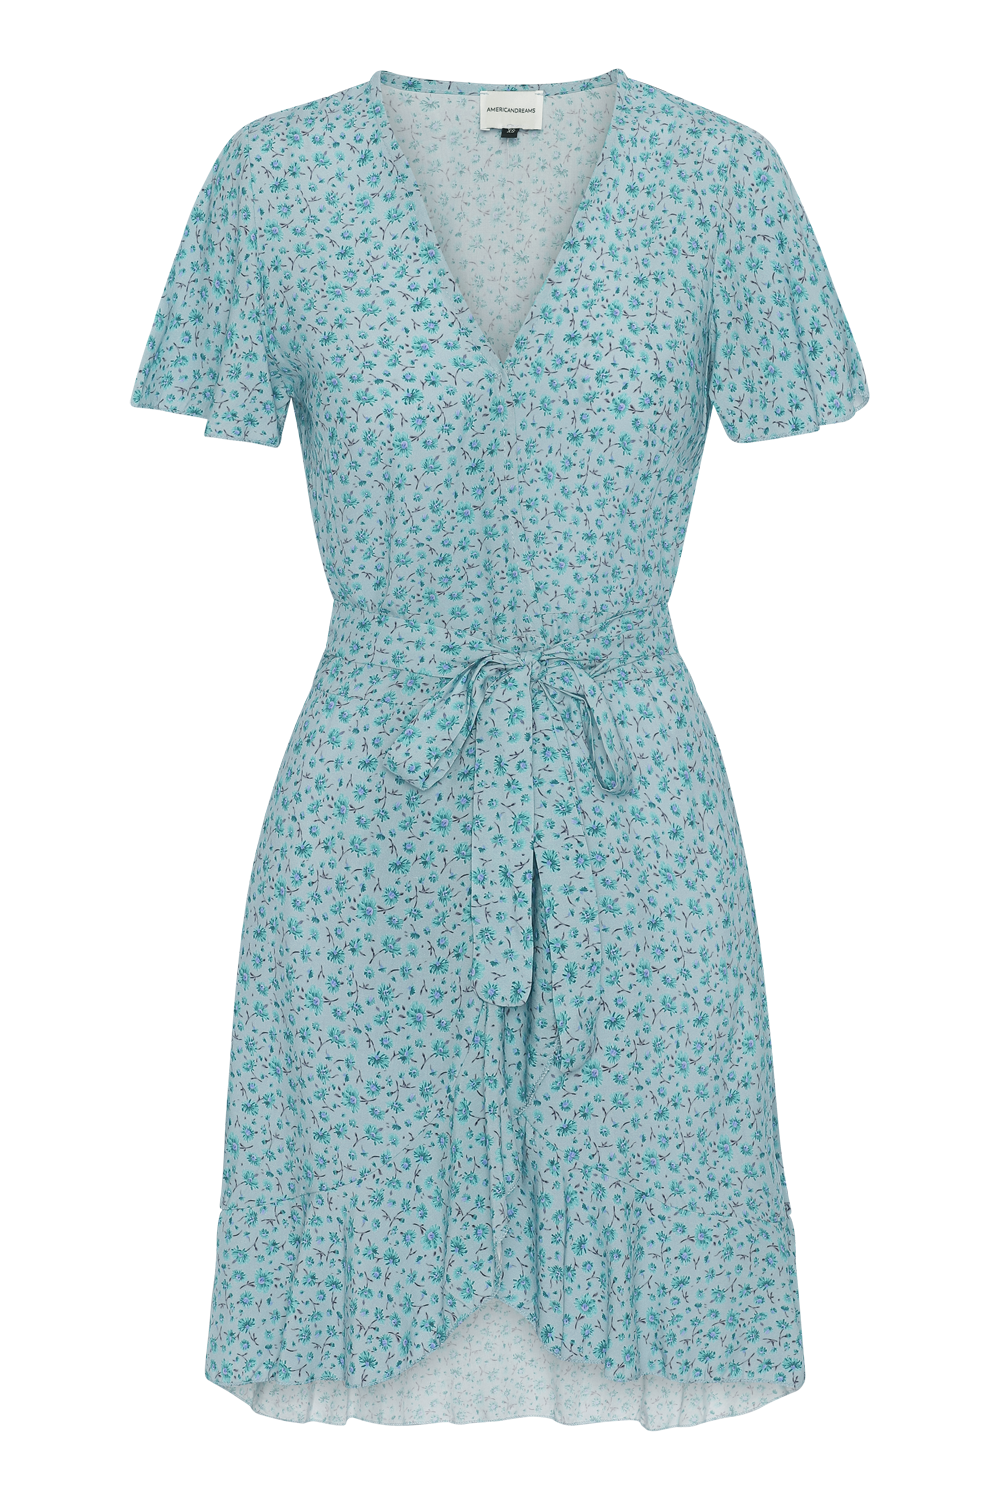 Milly Wrap Dress Short Turquoise Flower